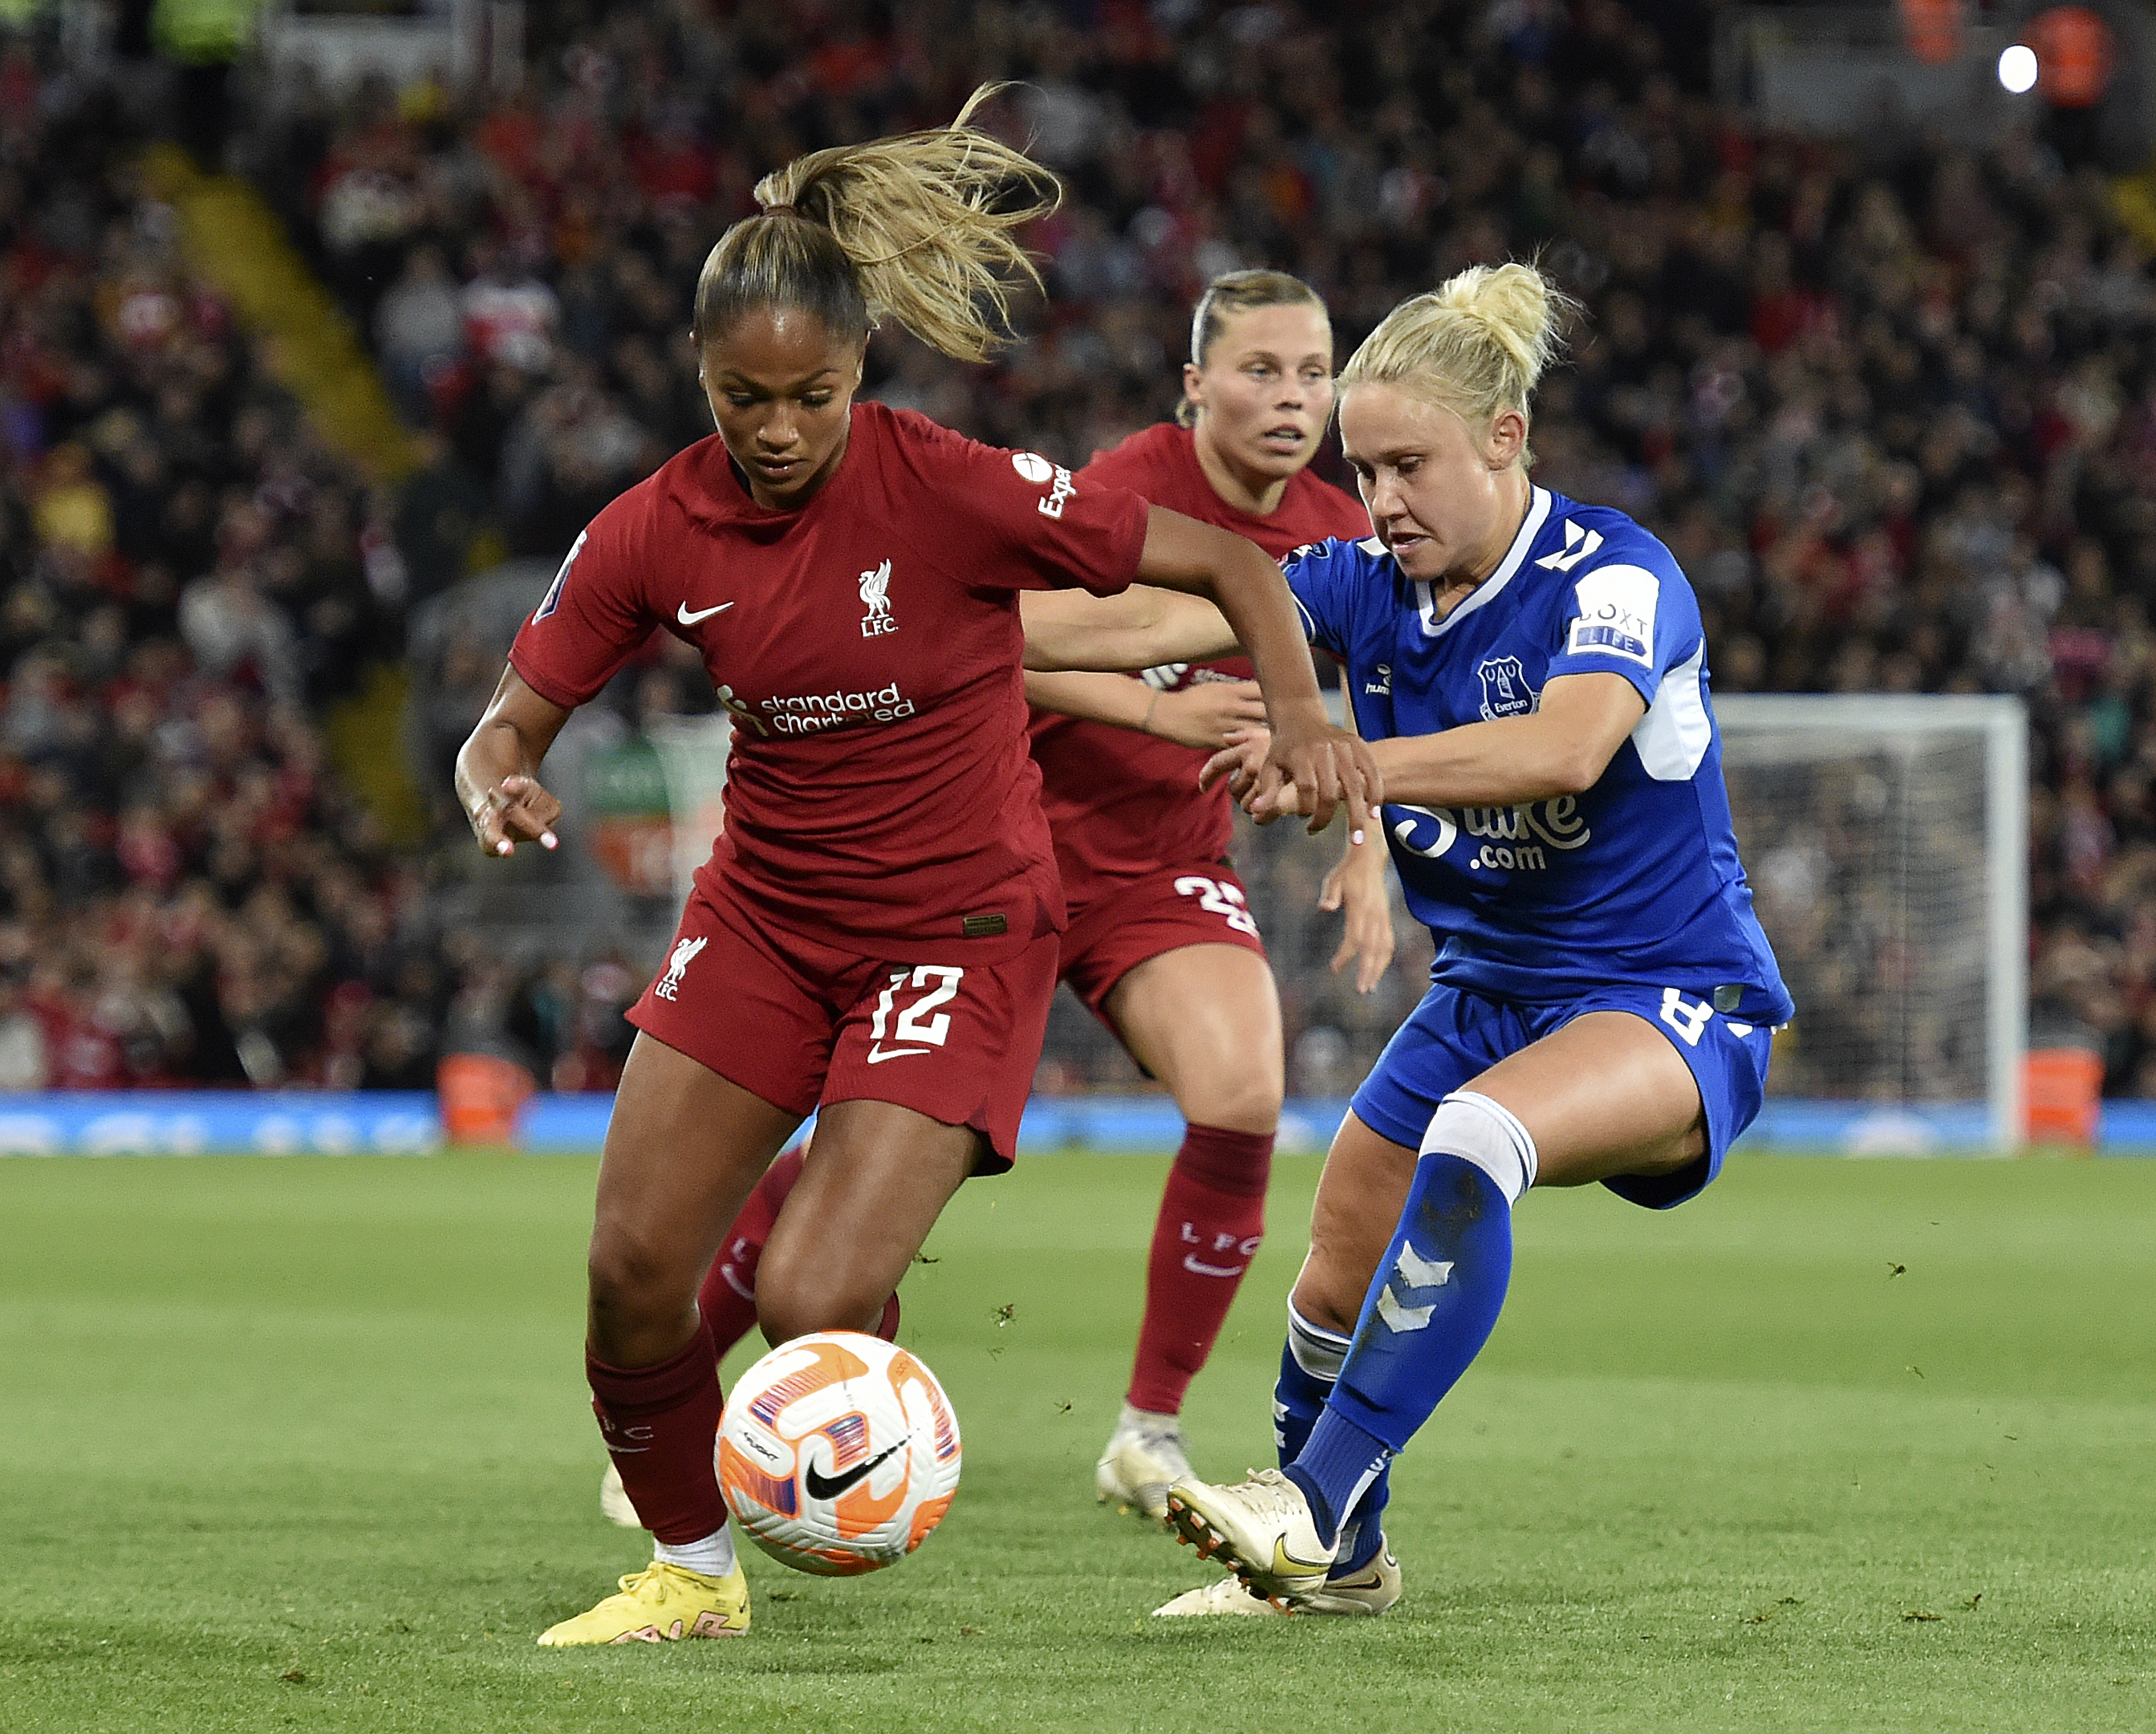 Taylor Hinds of Liverpool Women and Izzy Christiansen of Everton Women in action during the FA Women’s Super League match between Liverpool FC and Everton FC at Anfield on September 25, 2022 in Liverpool, United Kingdom.